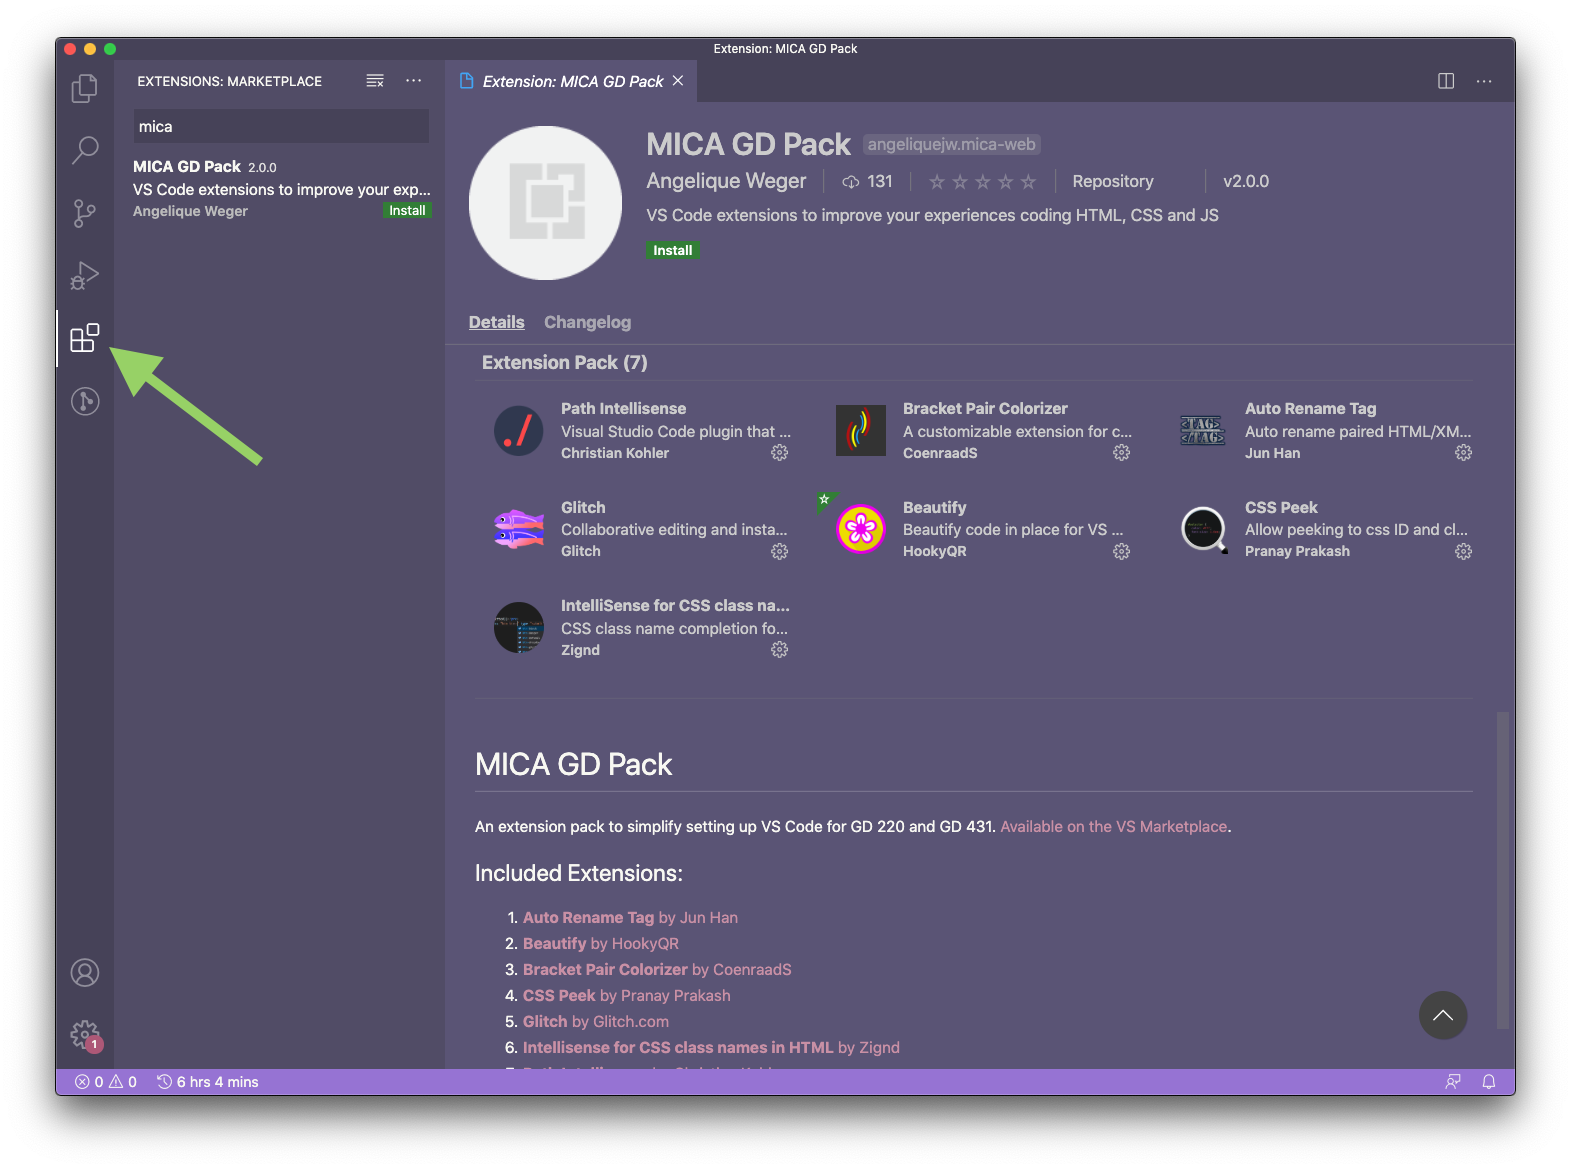 Screenshot of the MICA GD Pack extension from inside of VS Code with the Extensions icon identified.